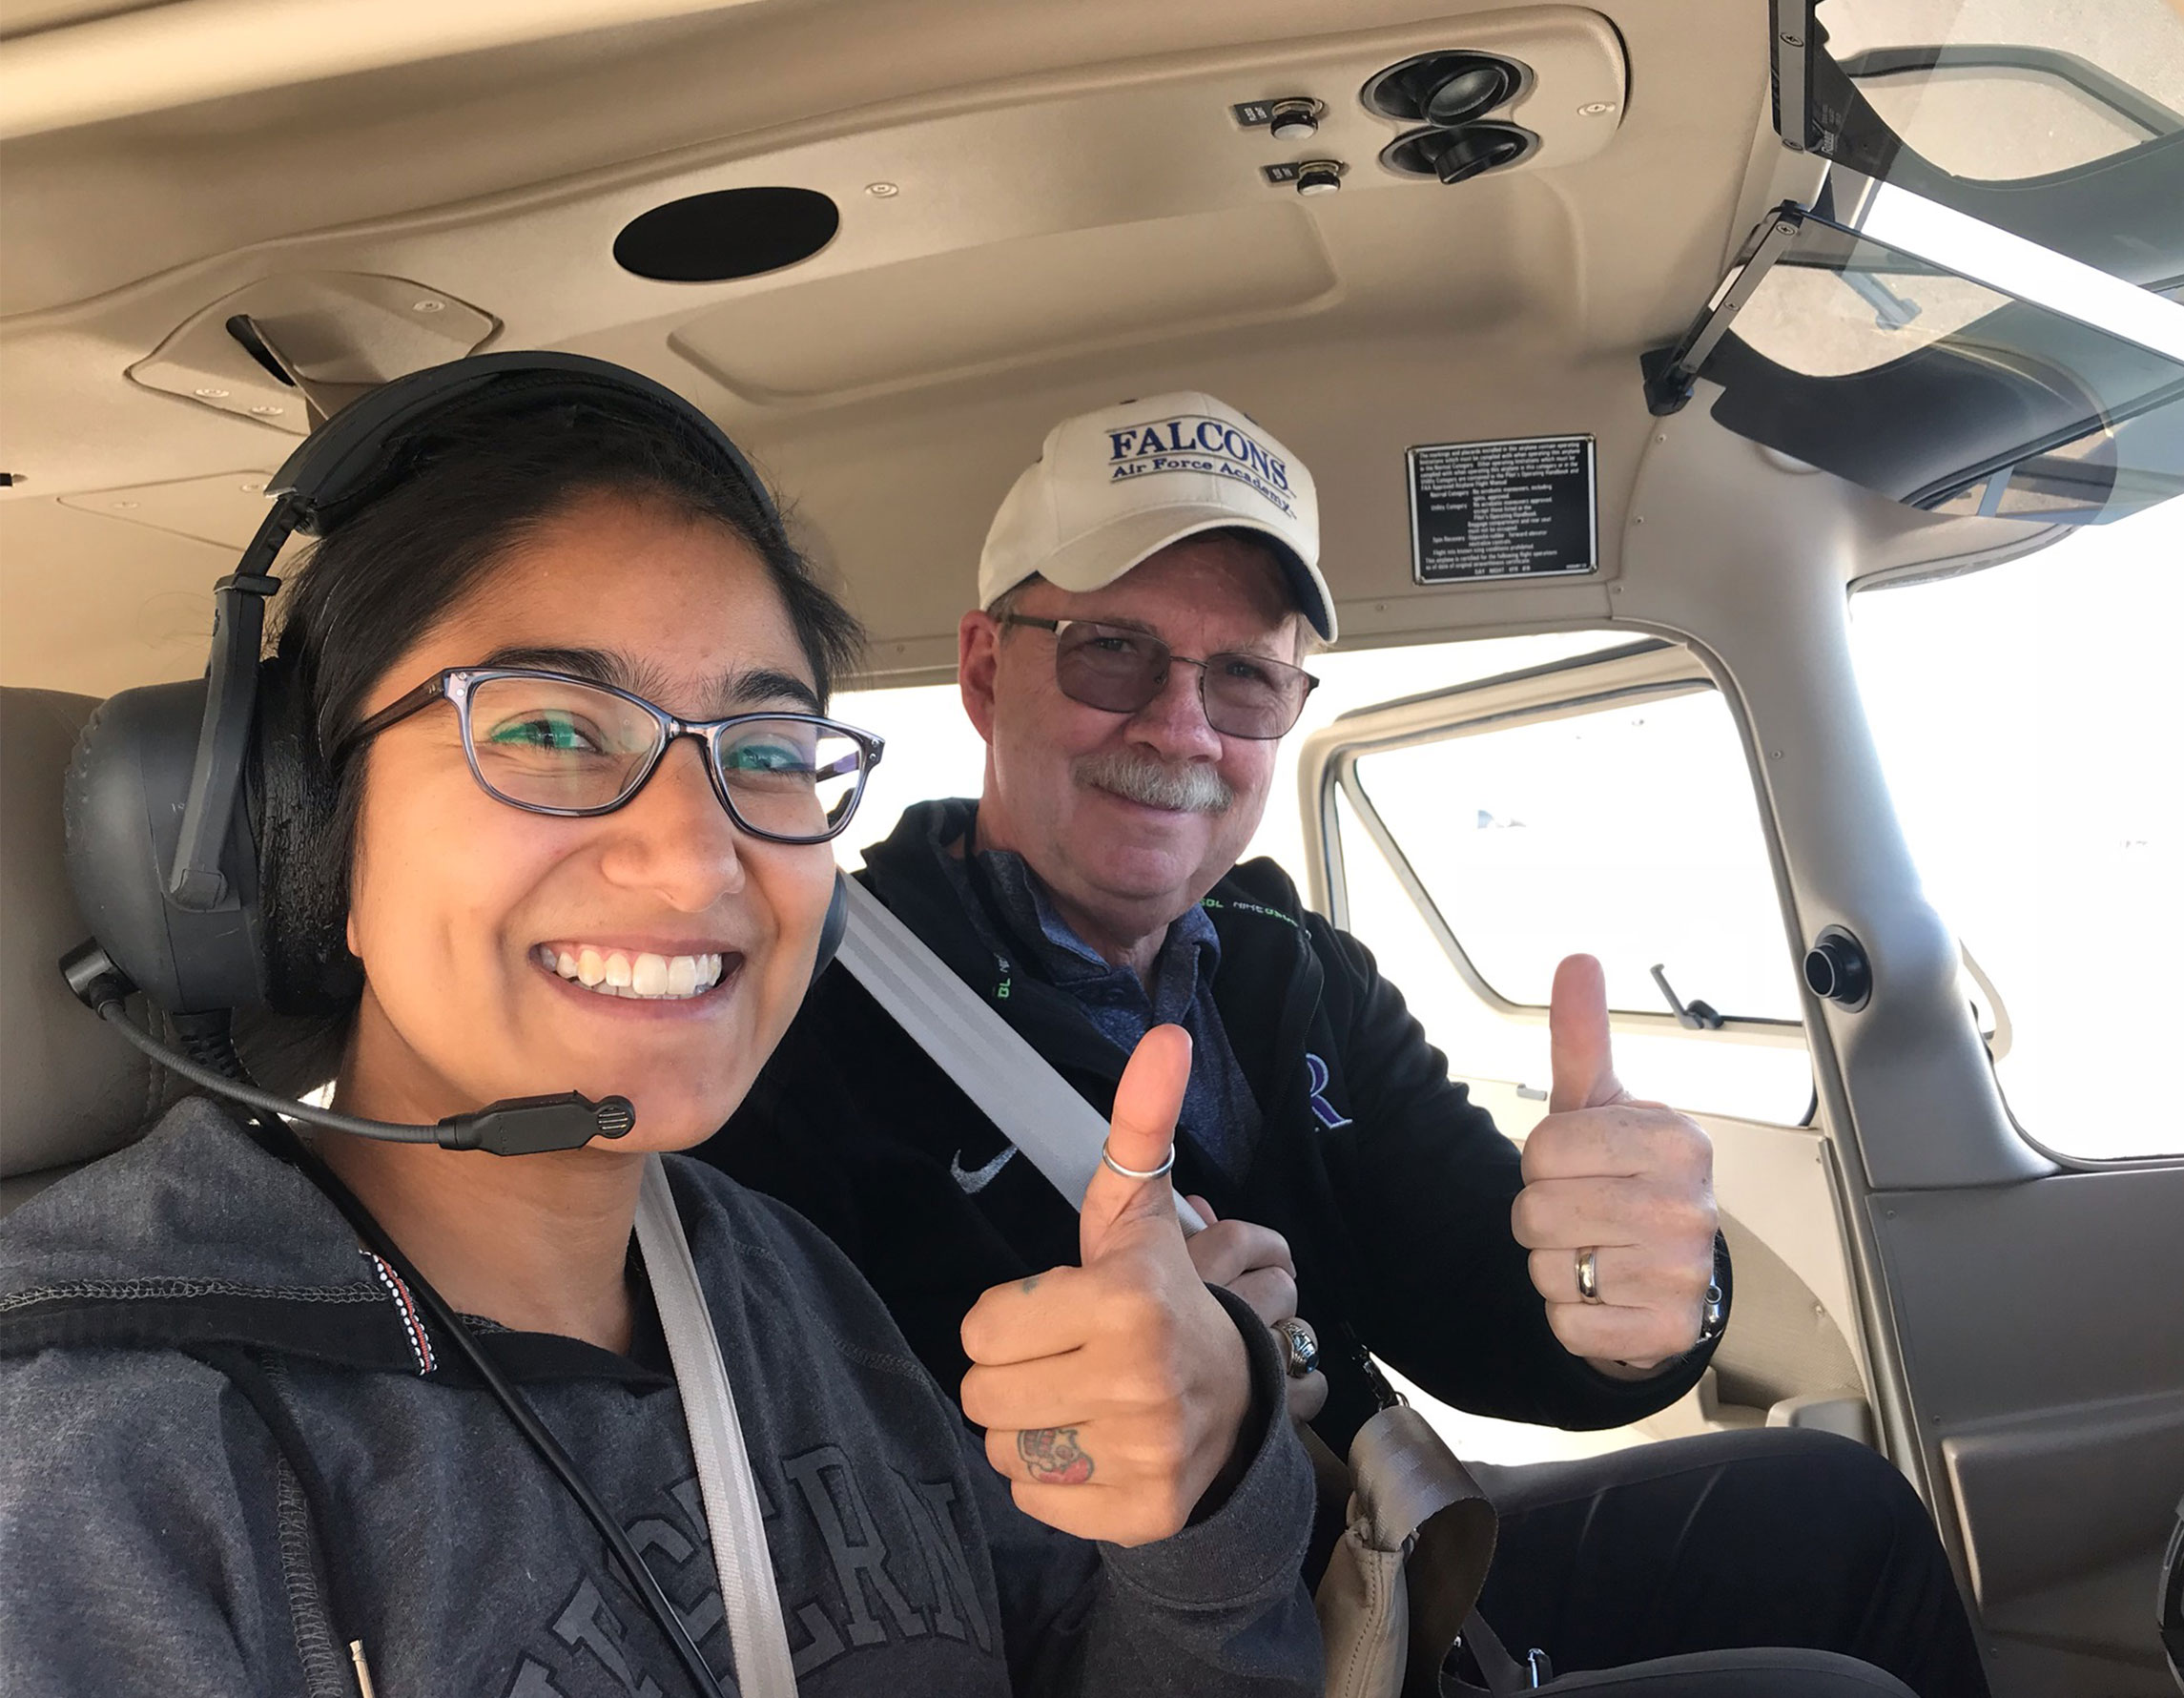 Student and flight instructor give thumbs up in an airplane